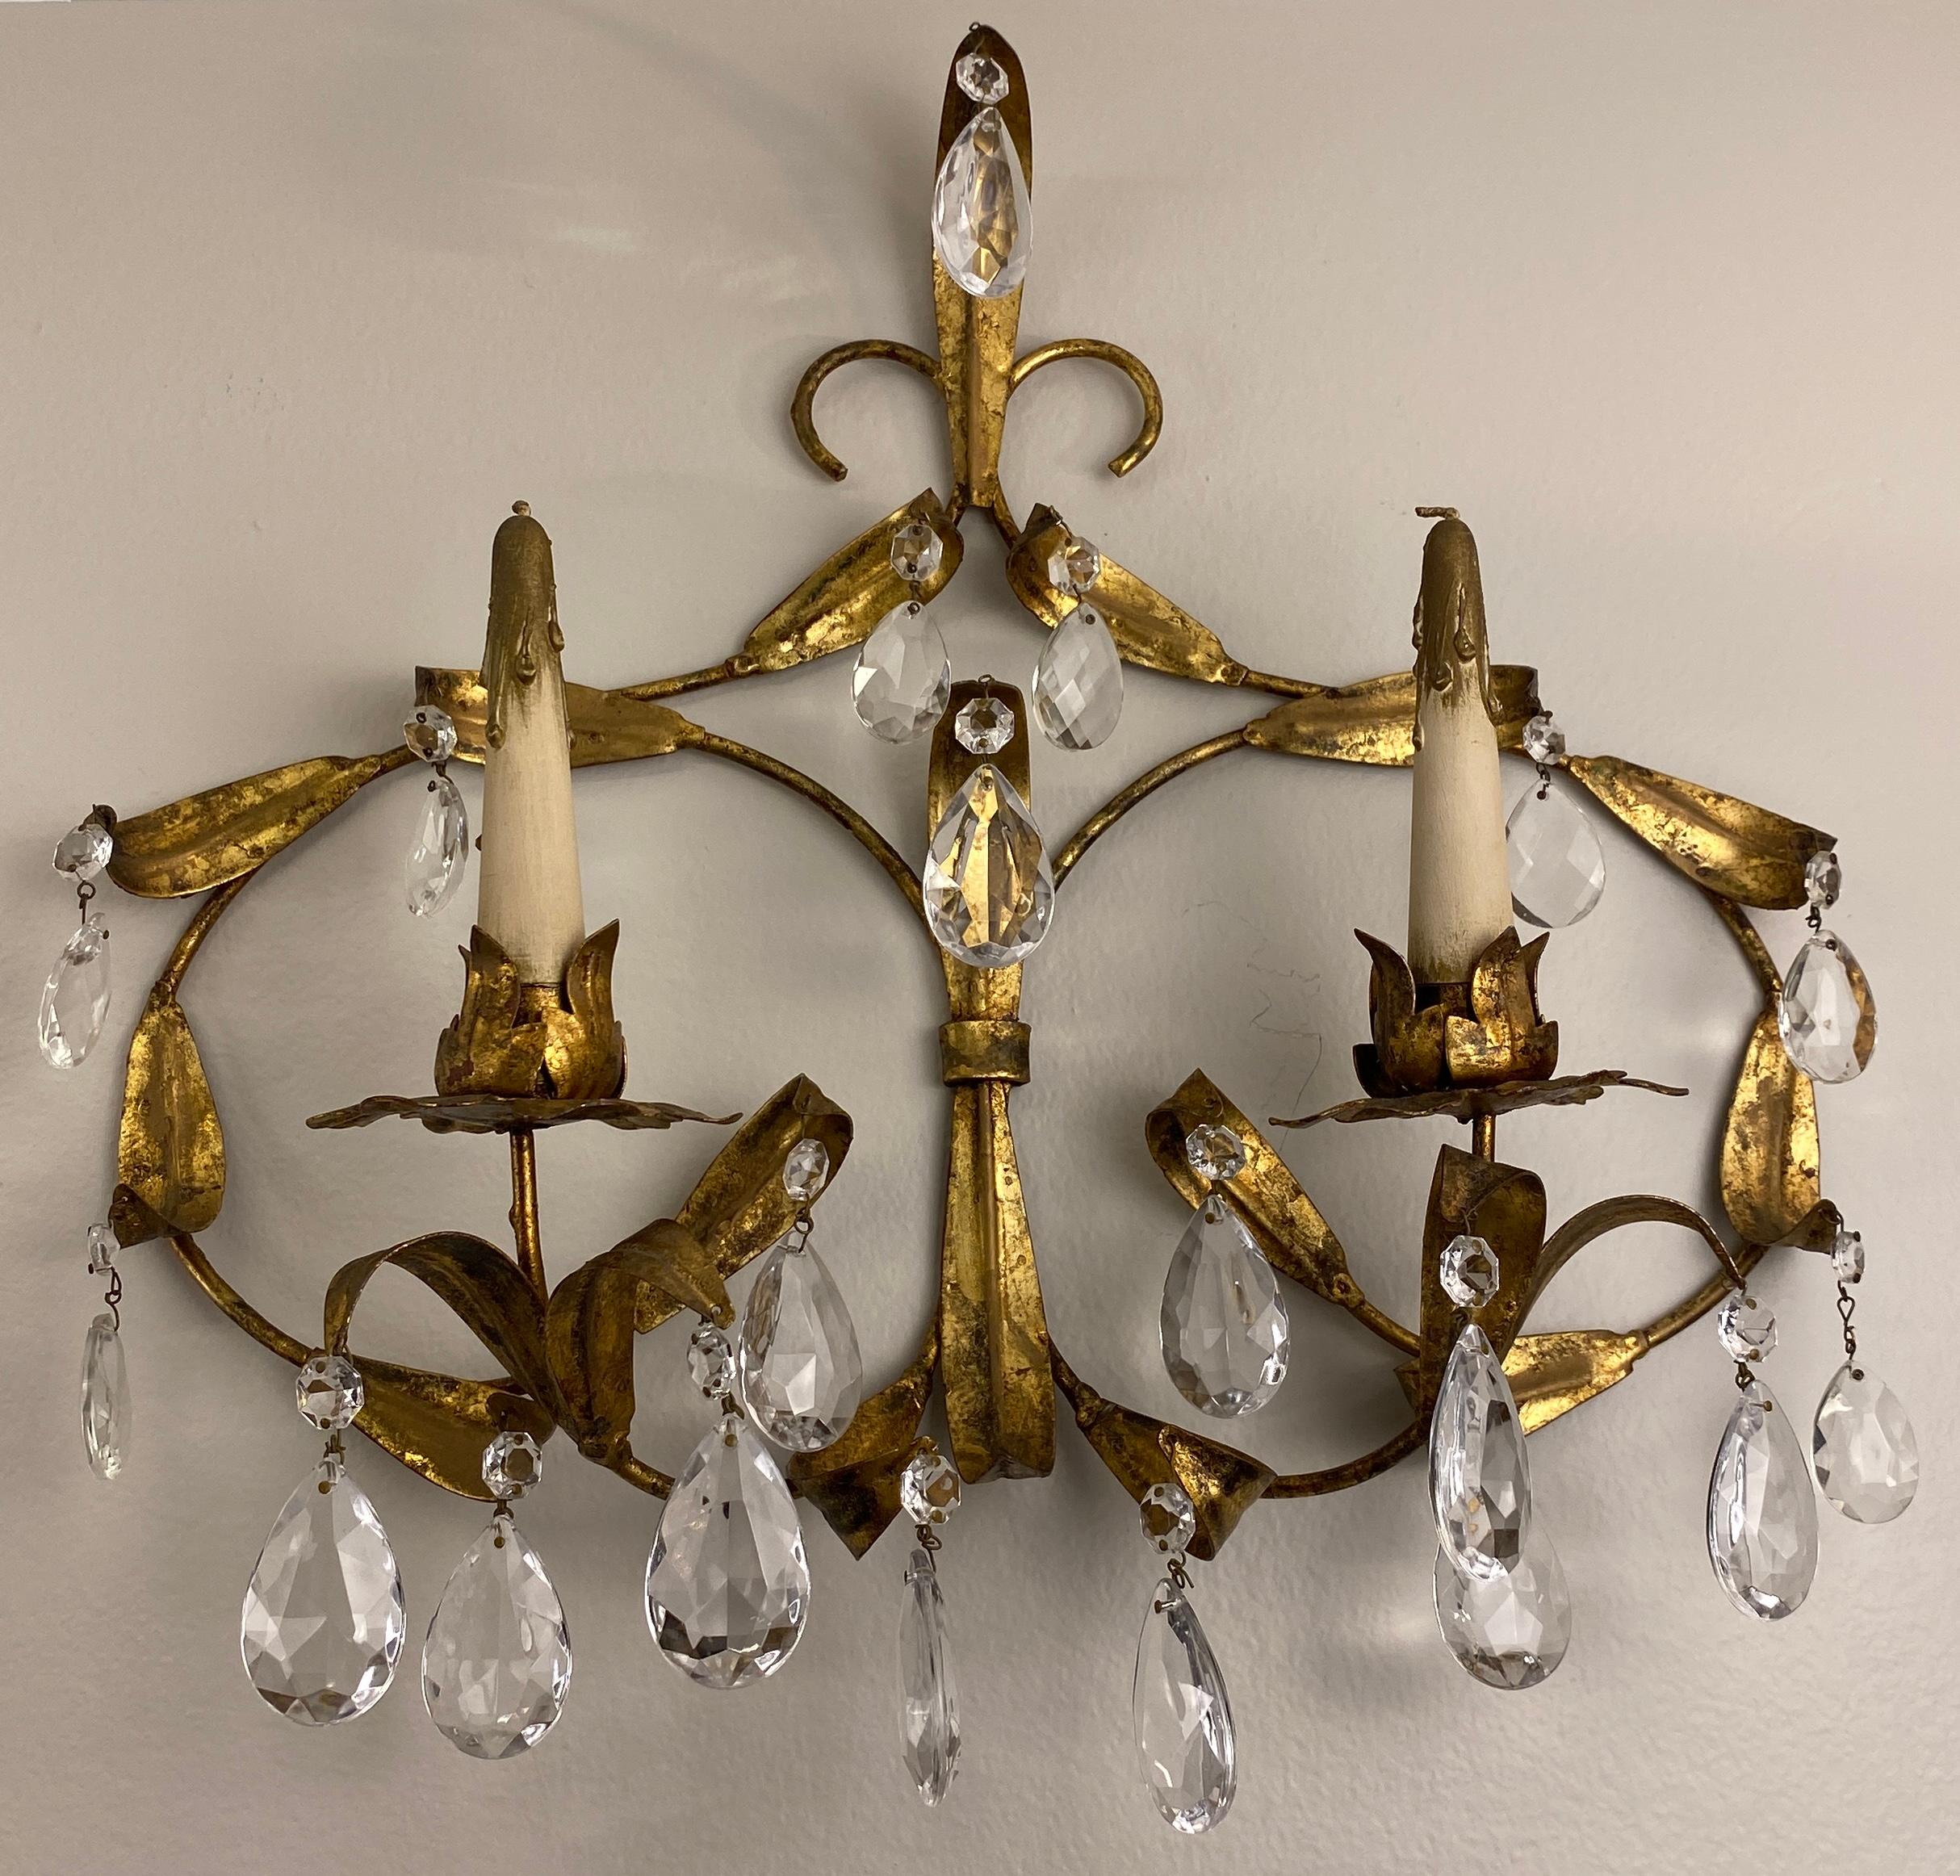 Stylish pair of Maison Baguès brass and crystal wall sconces. Unwired.
These mid-century 2 arm wall sconces are designed and made by Maison Baguès would enhance any contemporary or modern setting. The fine gold gilding, ironwork and crystal makes